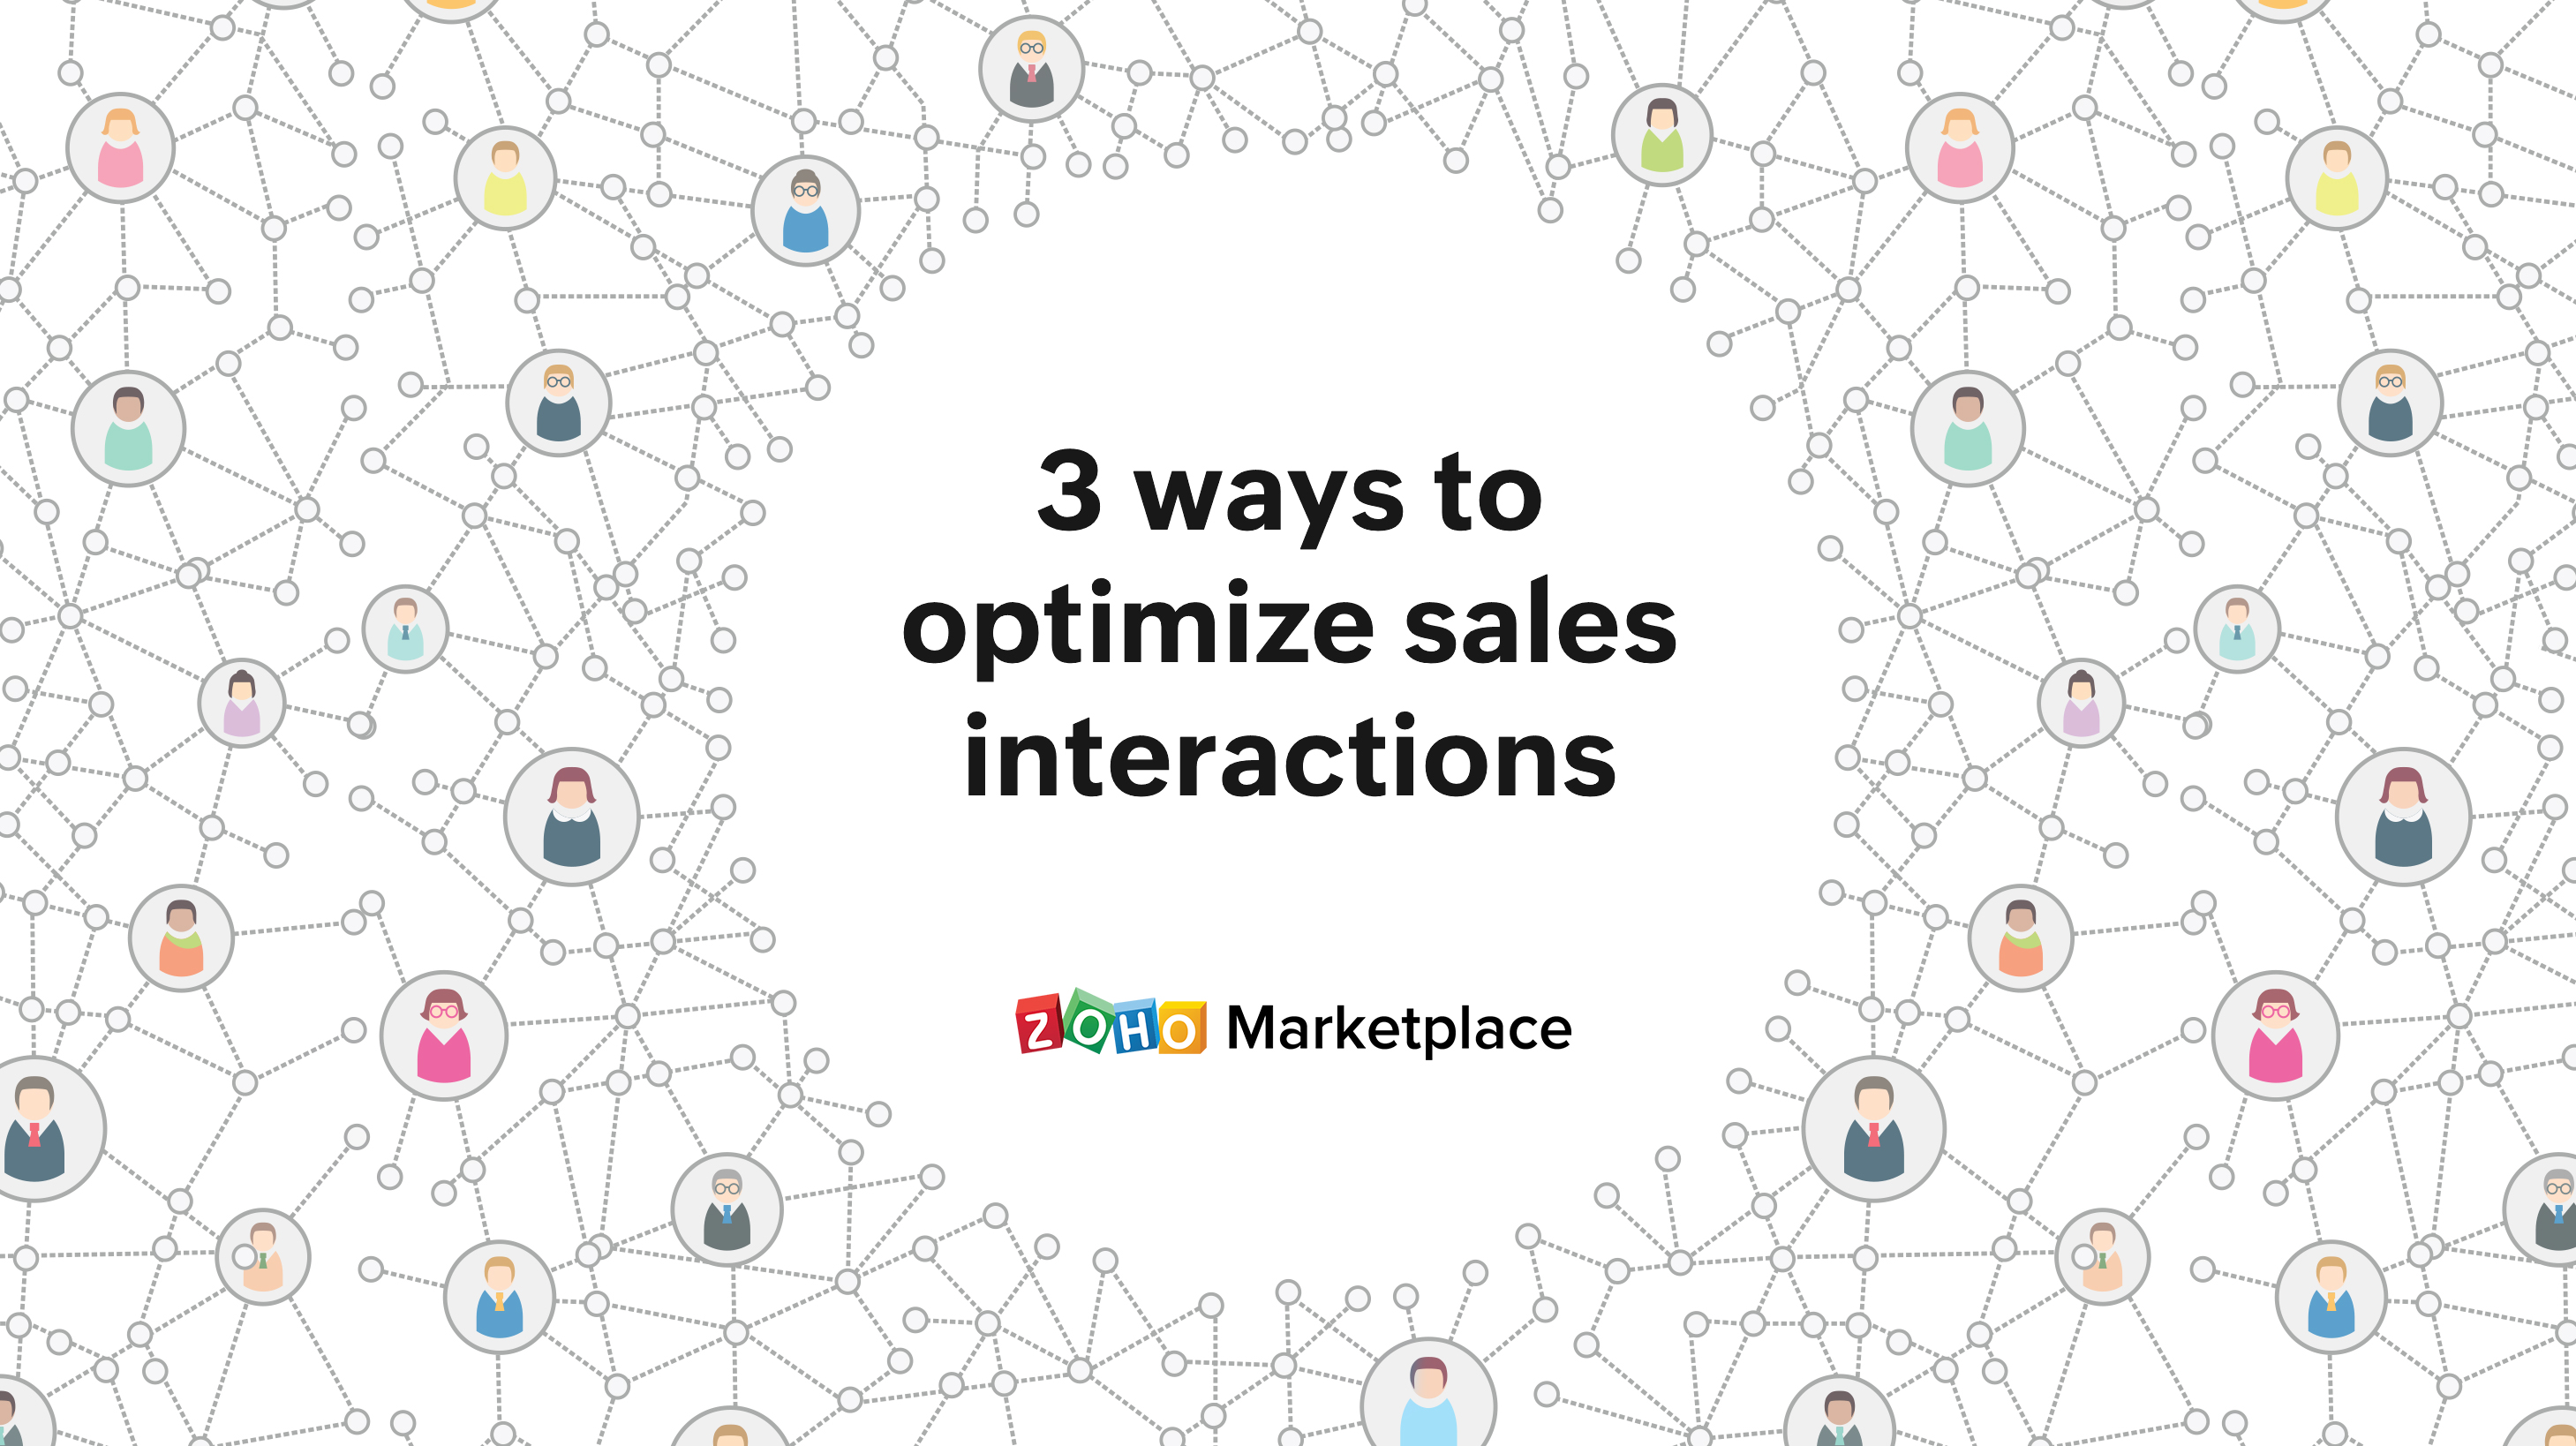 3 ways to optimize sales interactions to give leads the best service